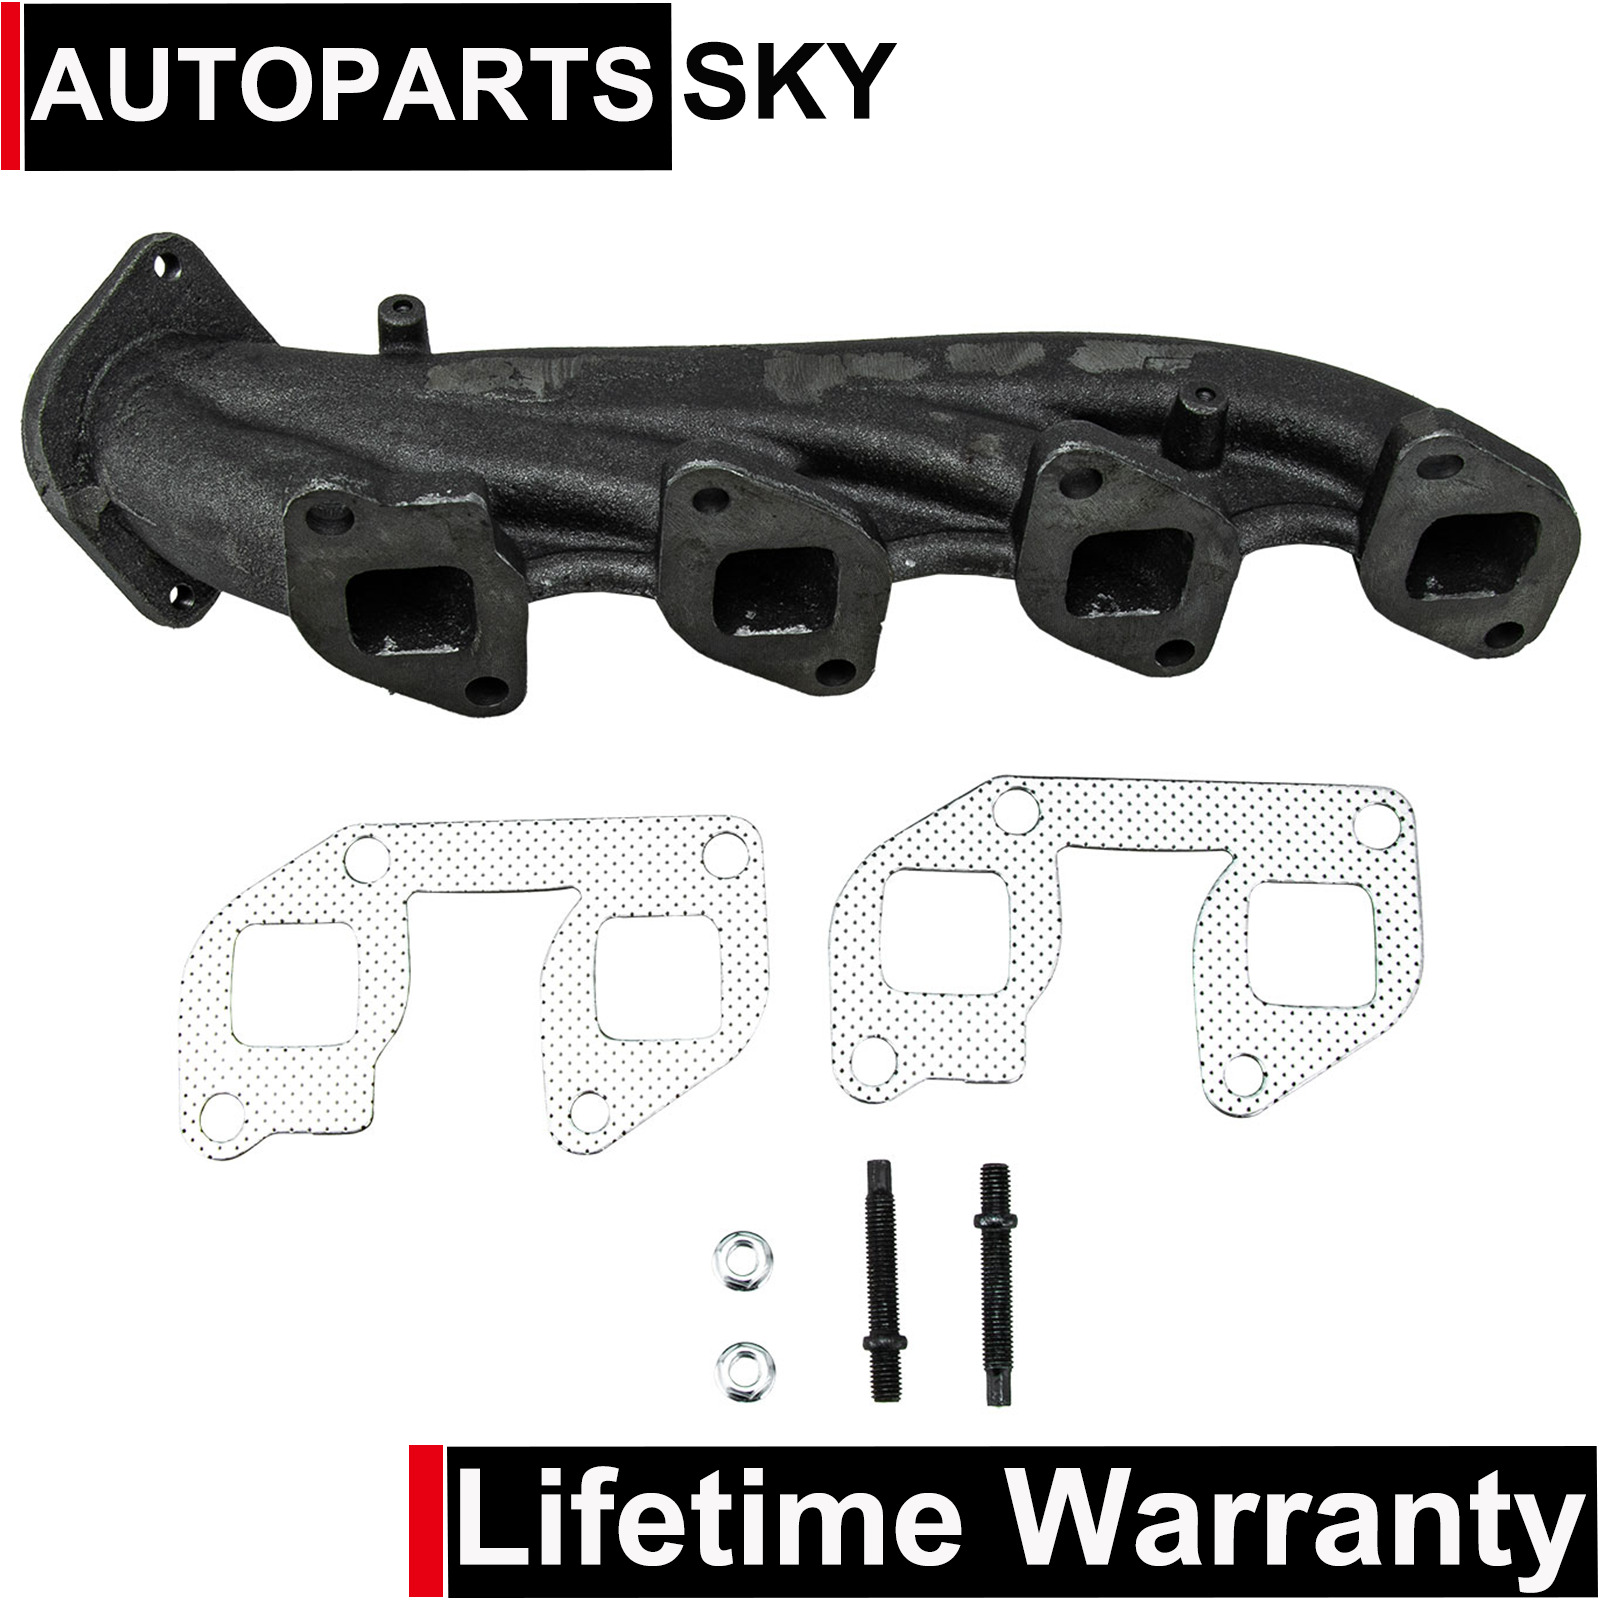 Left Exhaust Manifold w/ Gasket Kit For 2010-2014 Ford F-150 F-250 Super Duty V8